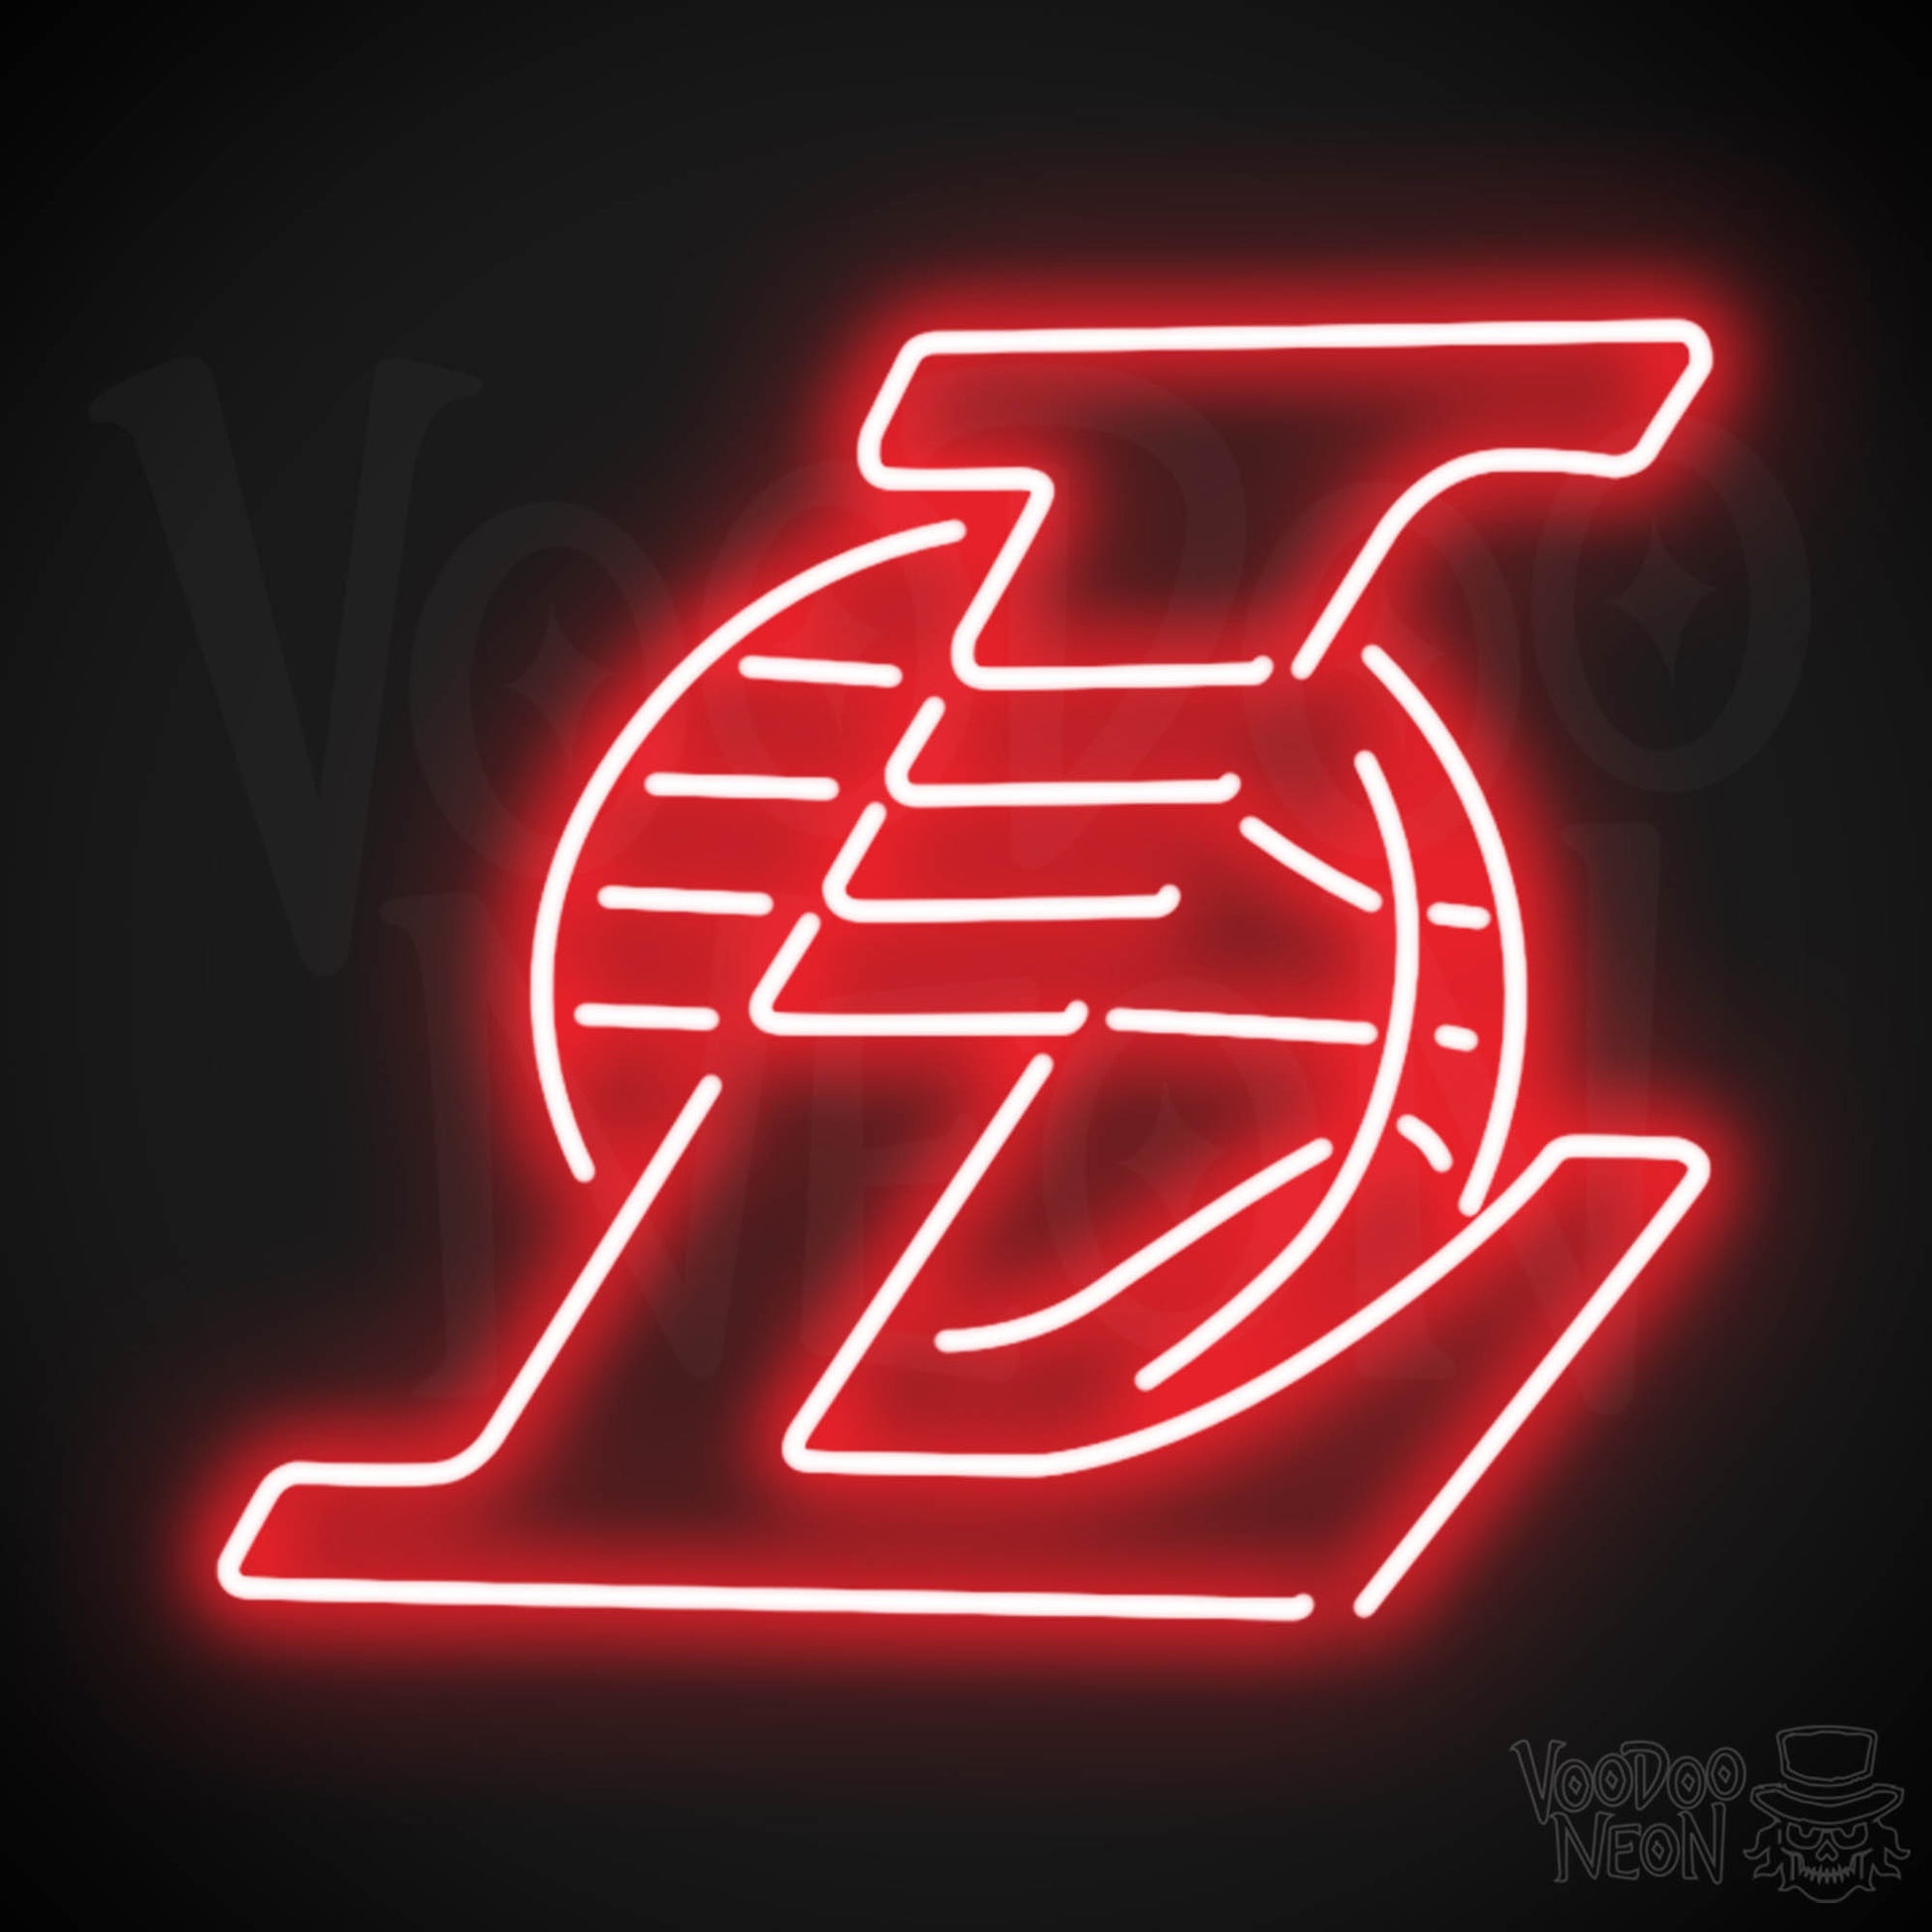 Los Angeles Lakers Neon Sign - Los Angeles Lakers Sign - Neon Lakers Logo Wall Art - Color Red